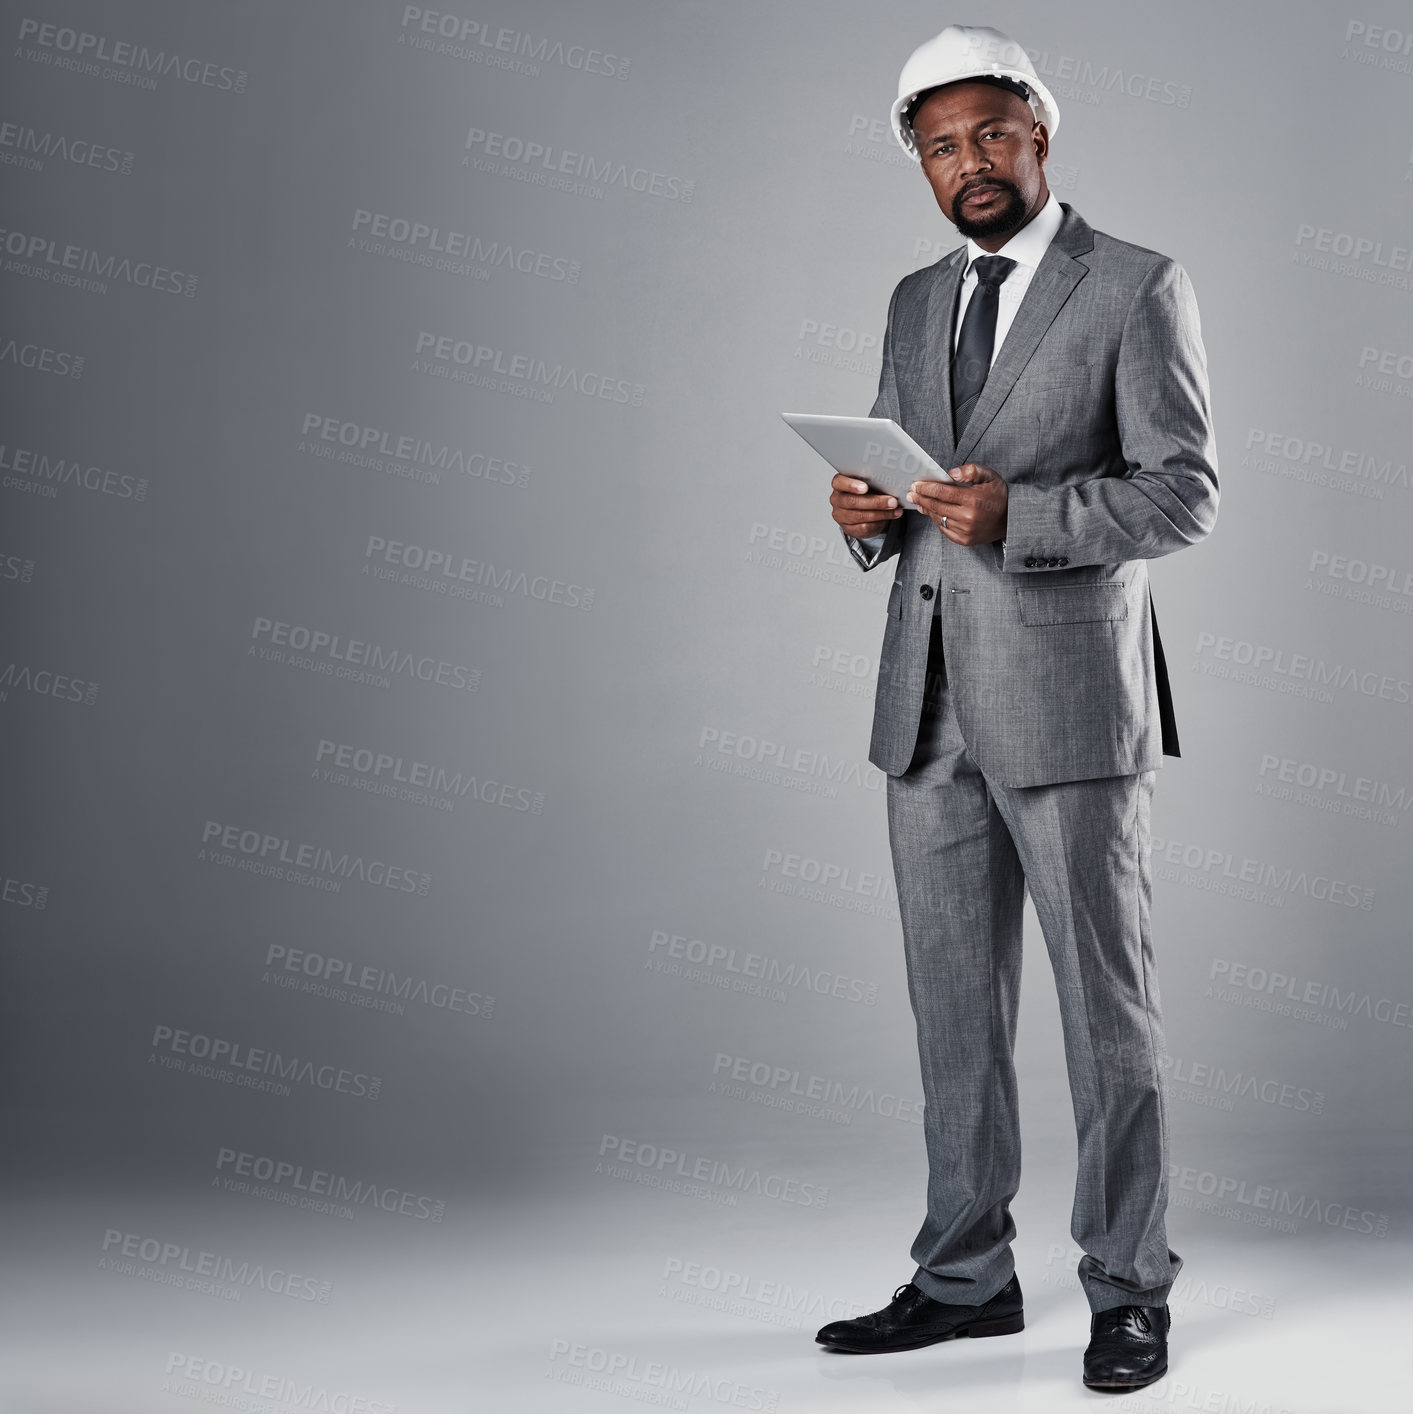 Buy stock photo Portrait of a well-dressed civil engineer using his tablet while standing in the studio